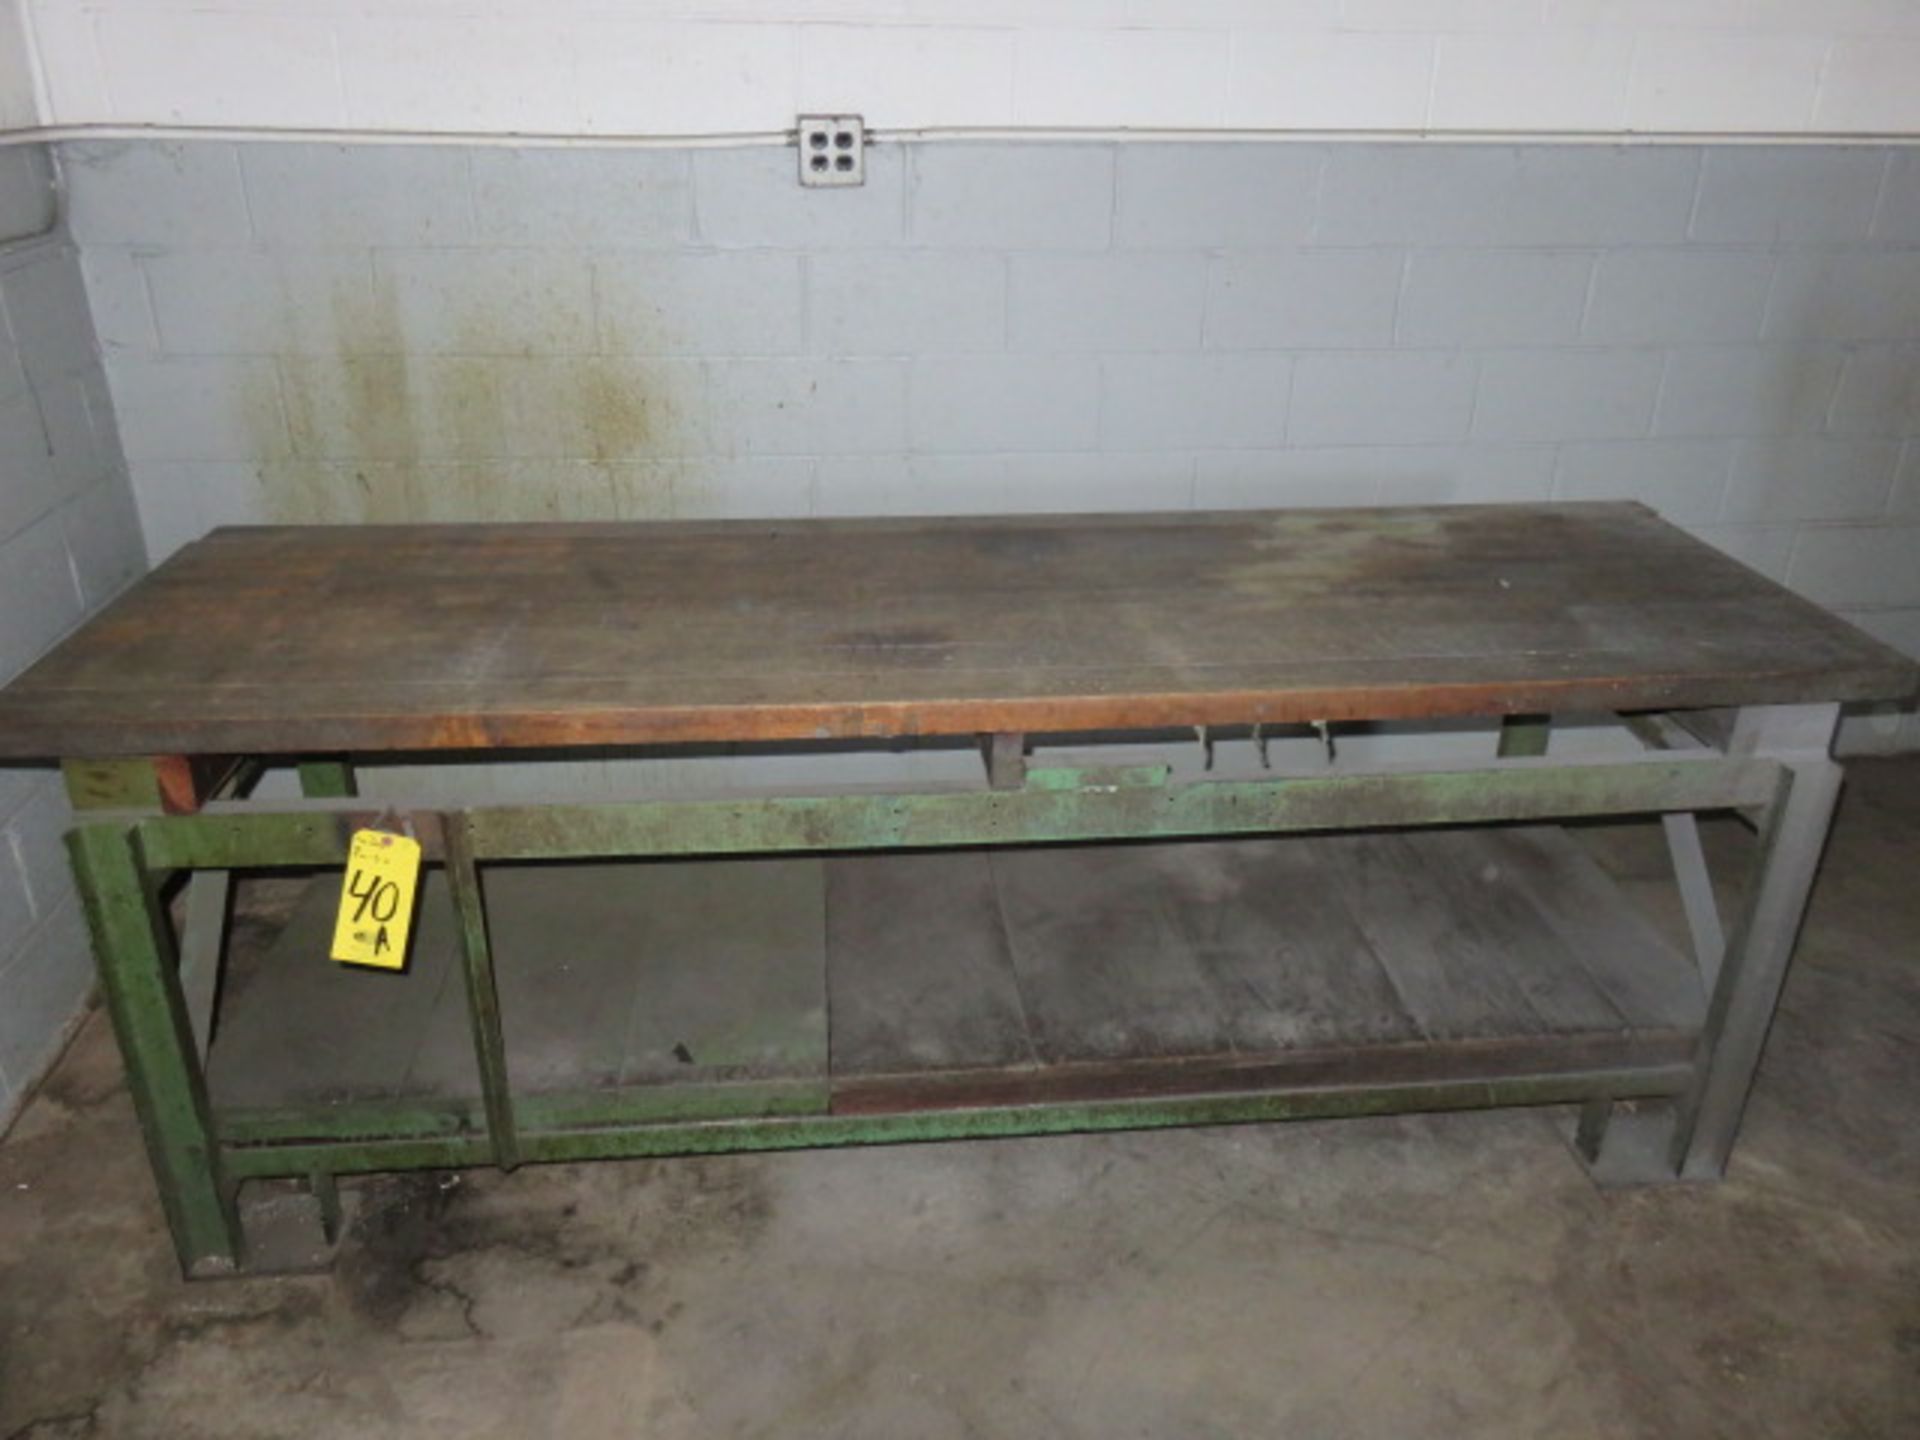 30 IN, X 96 UB, BUTCHER BLOCK BENCH WITH IRON FRAME